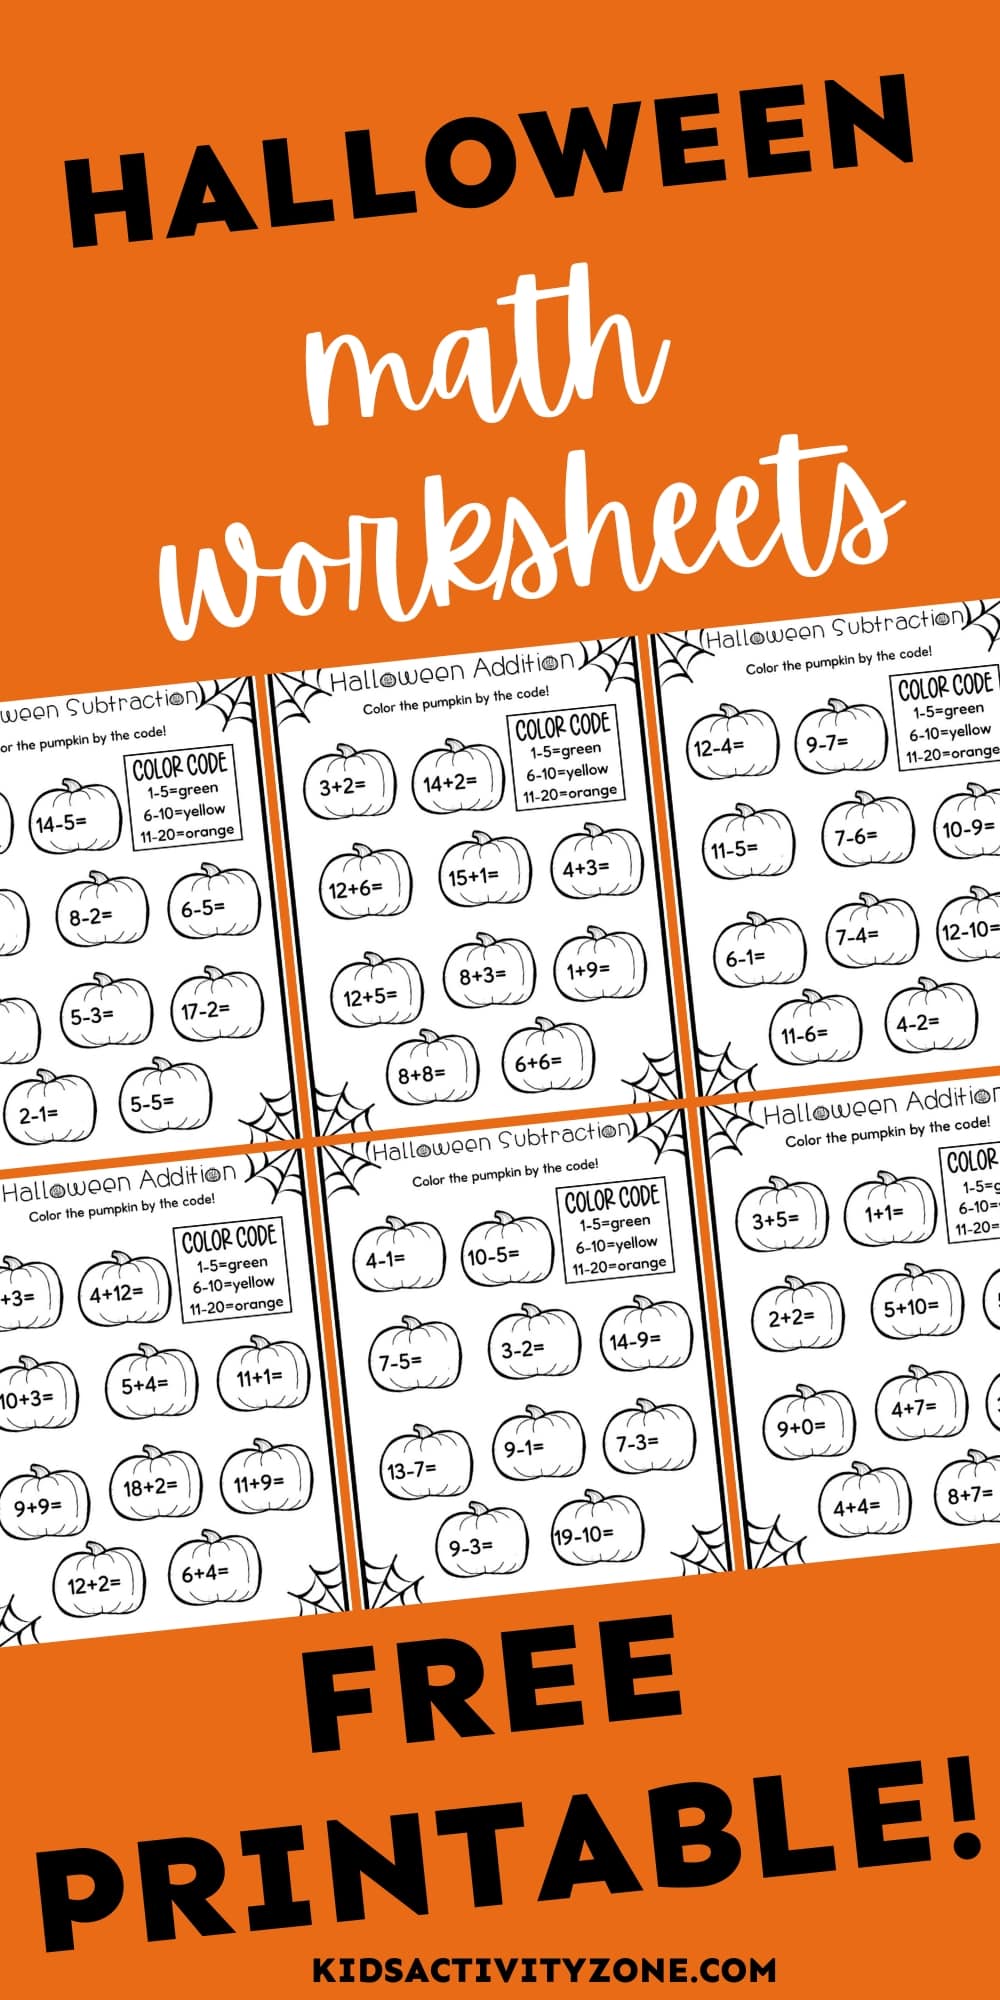 Free Printable Halloween Math Worksheets that are perfect for kindergarteners and preschoolers. Plus, there are keys included for them! For even more fun color your pumpkins with the color code. Grab these fun free Halloween worksheets to practice math with your children or in the classroom.